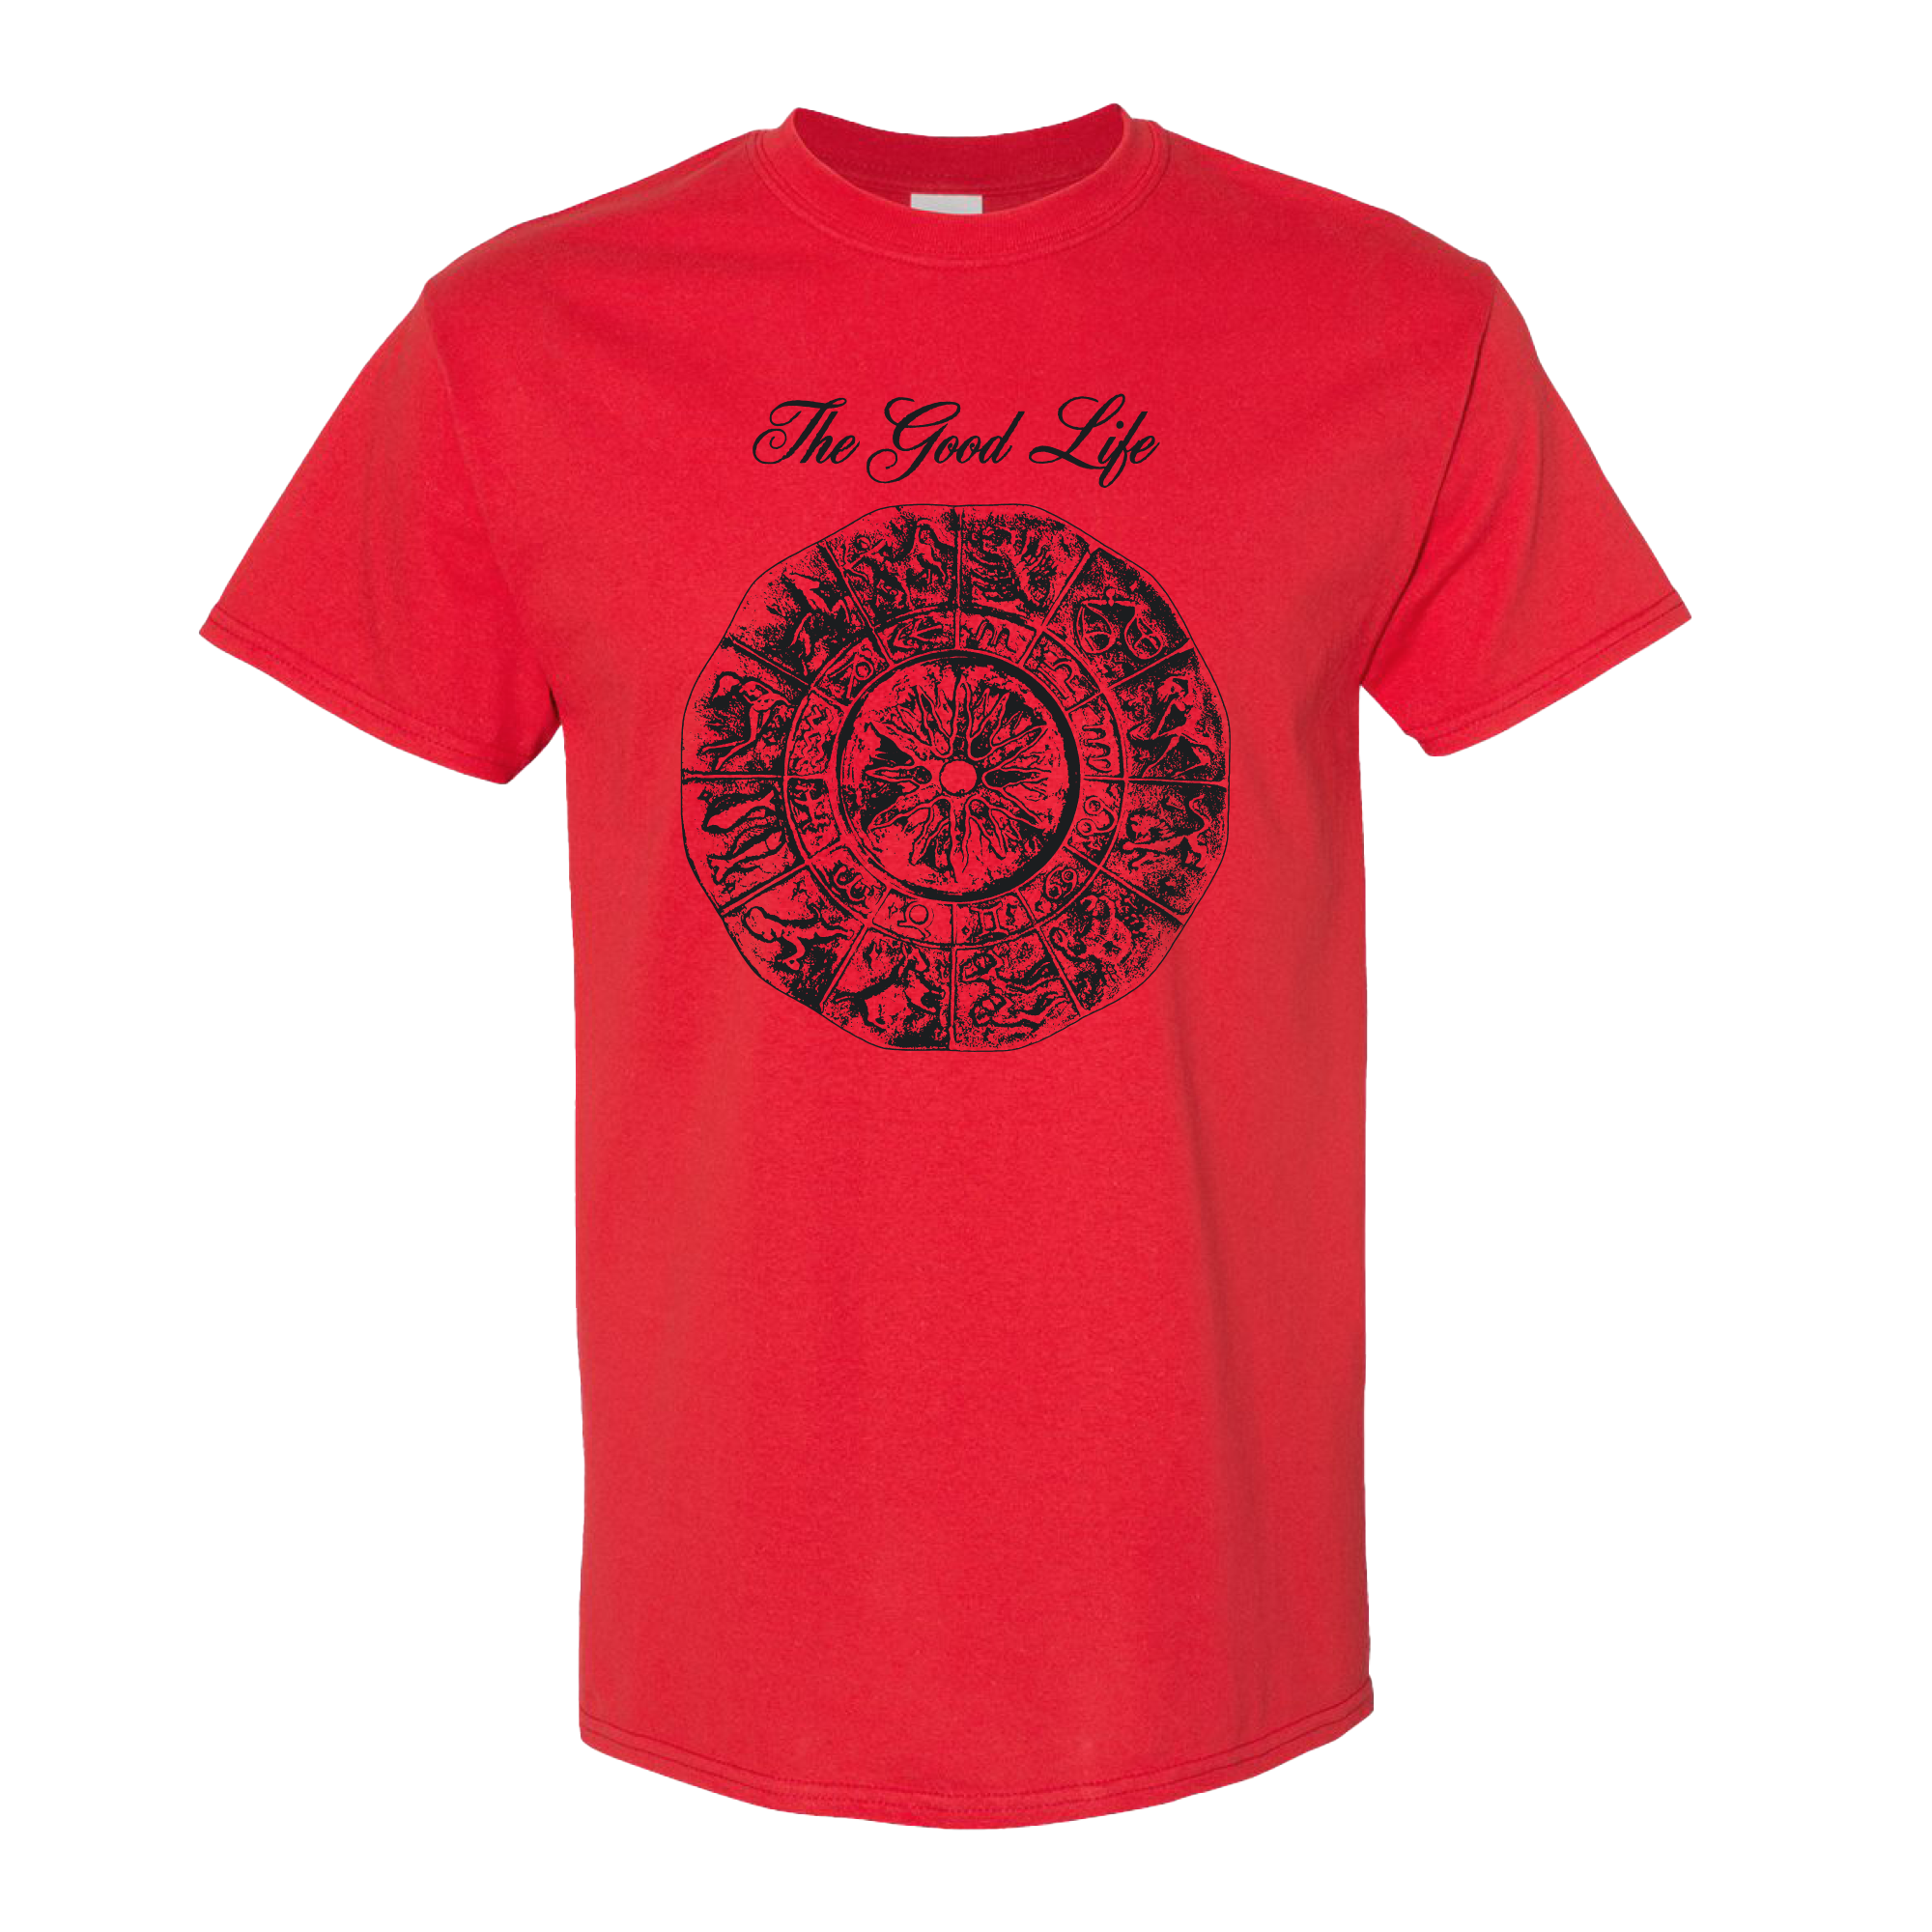 The Good Life | Album Of The Year T-Shirt - Red